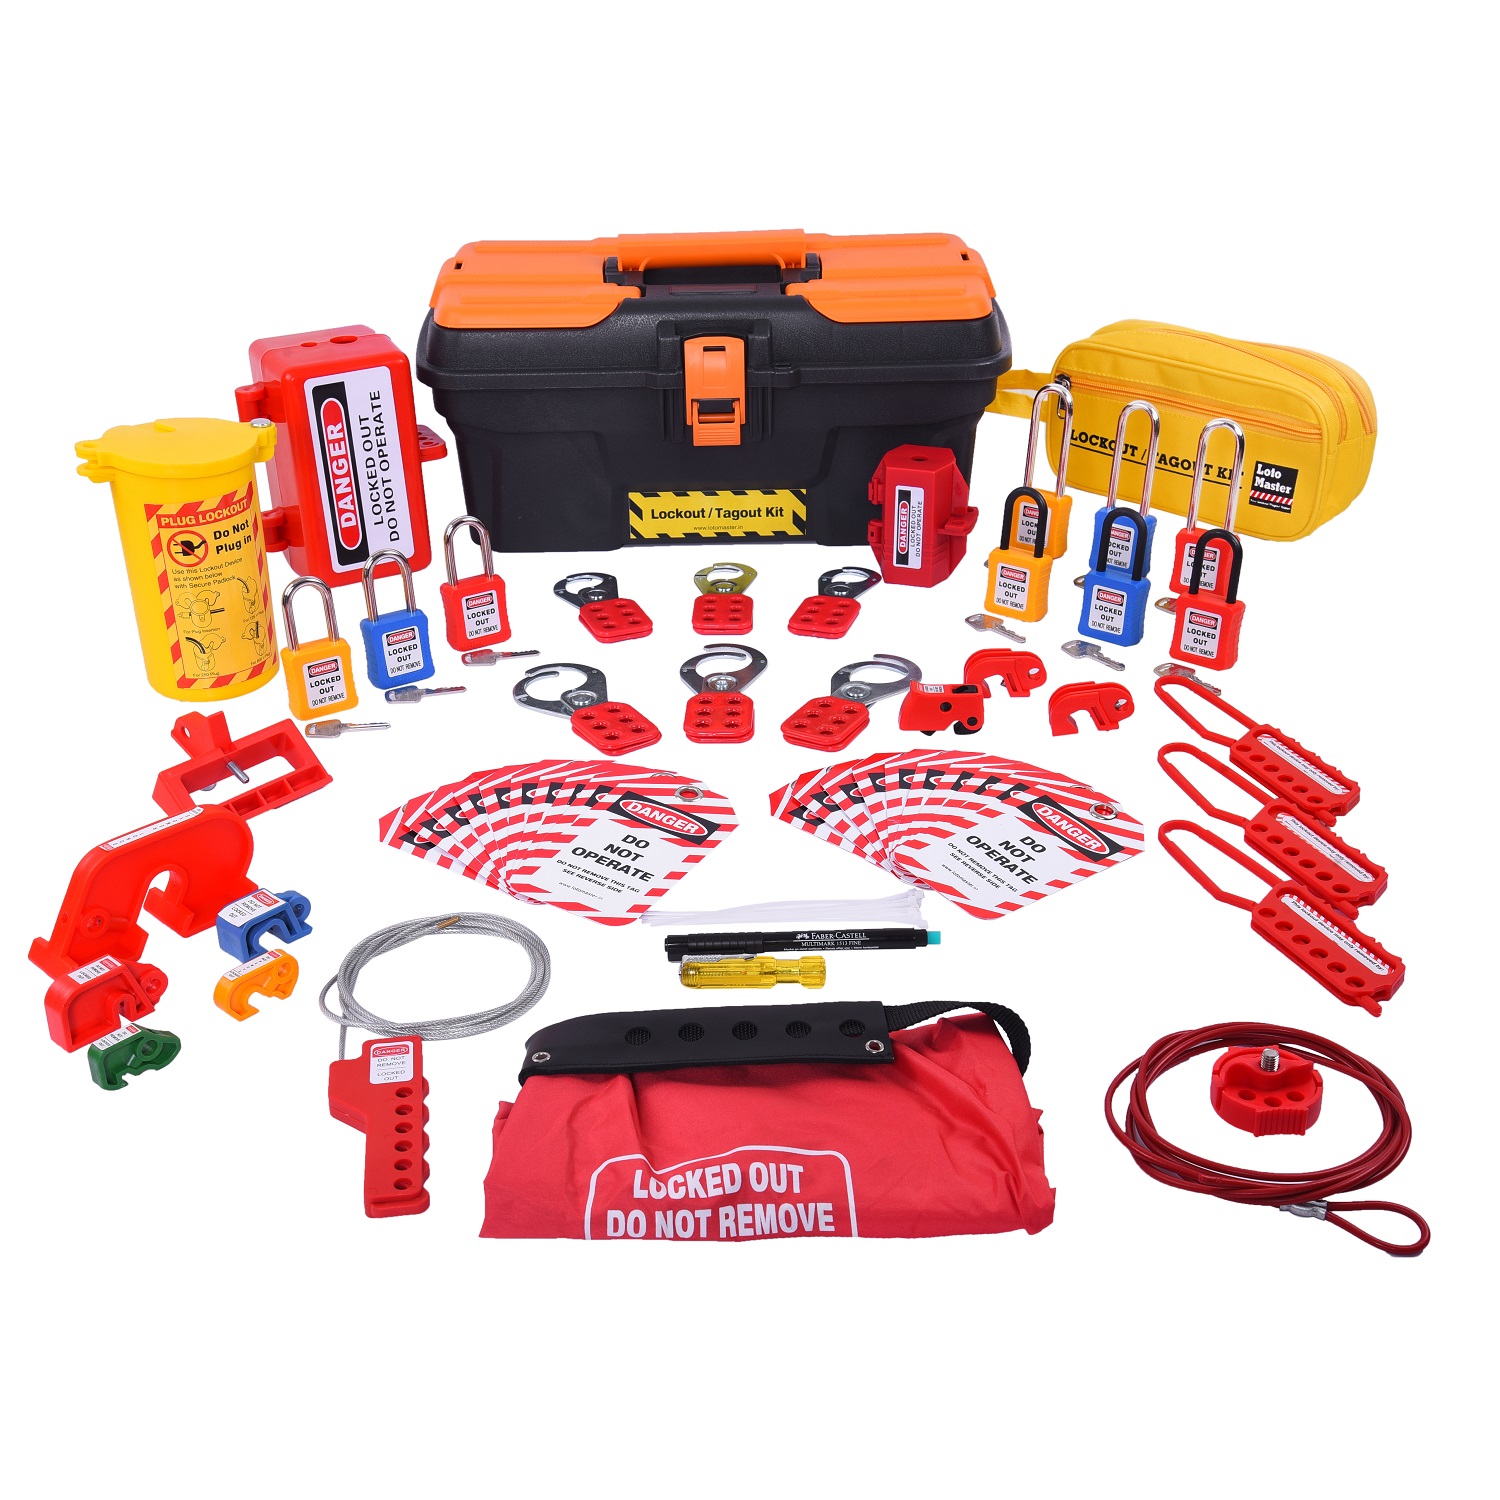 LOTO KIT ELECTRICAL - MID - LOTO SAFETY PRODUCTS